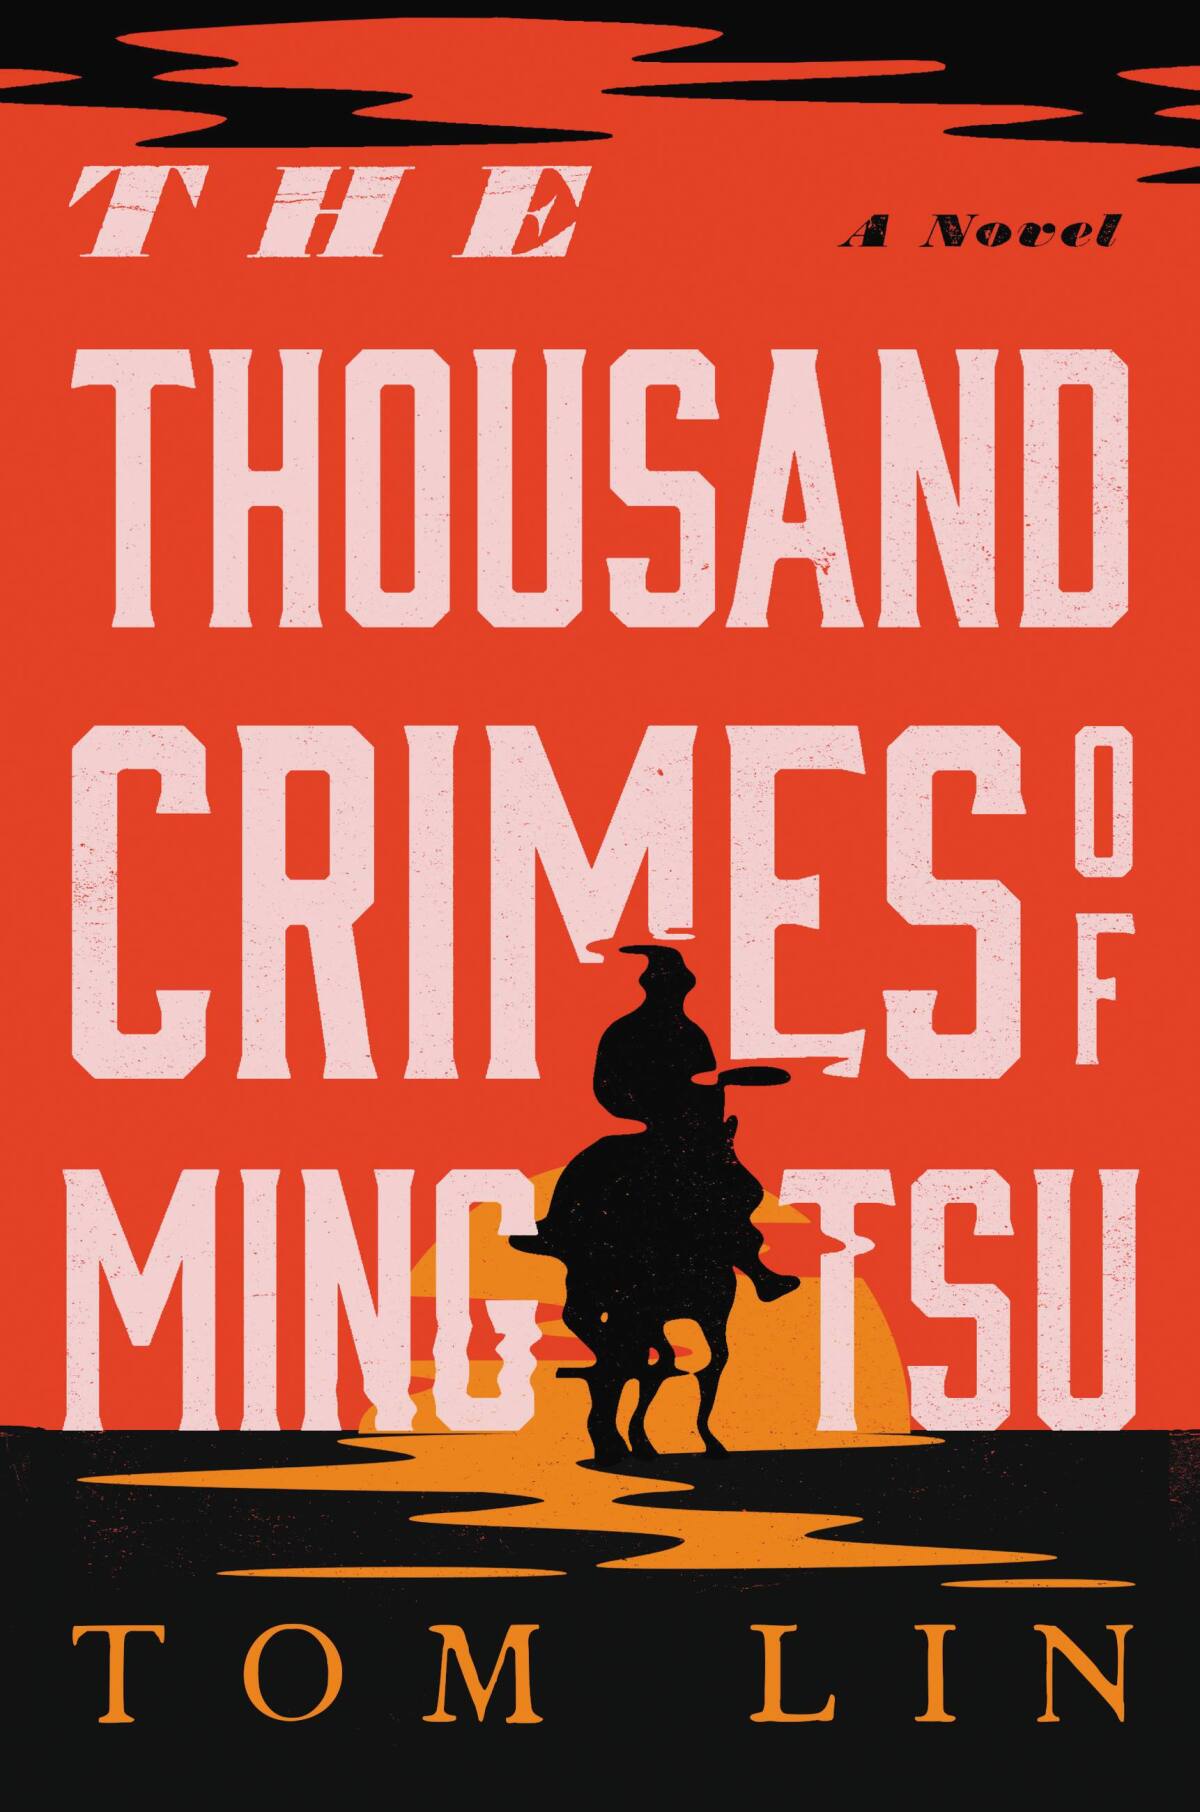 The cover of the book "The Thousand Crimes of Ming Tsu," by Tom Lin